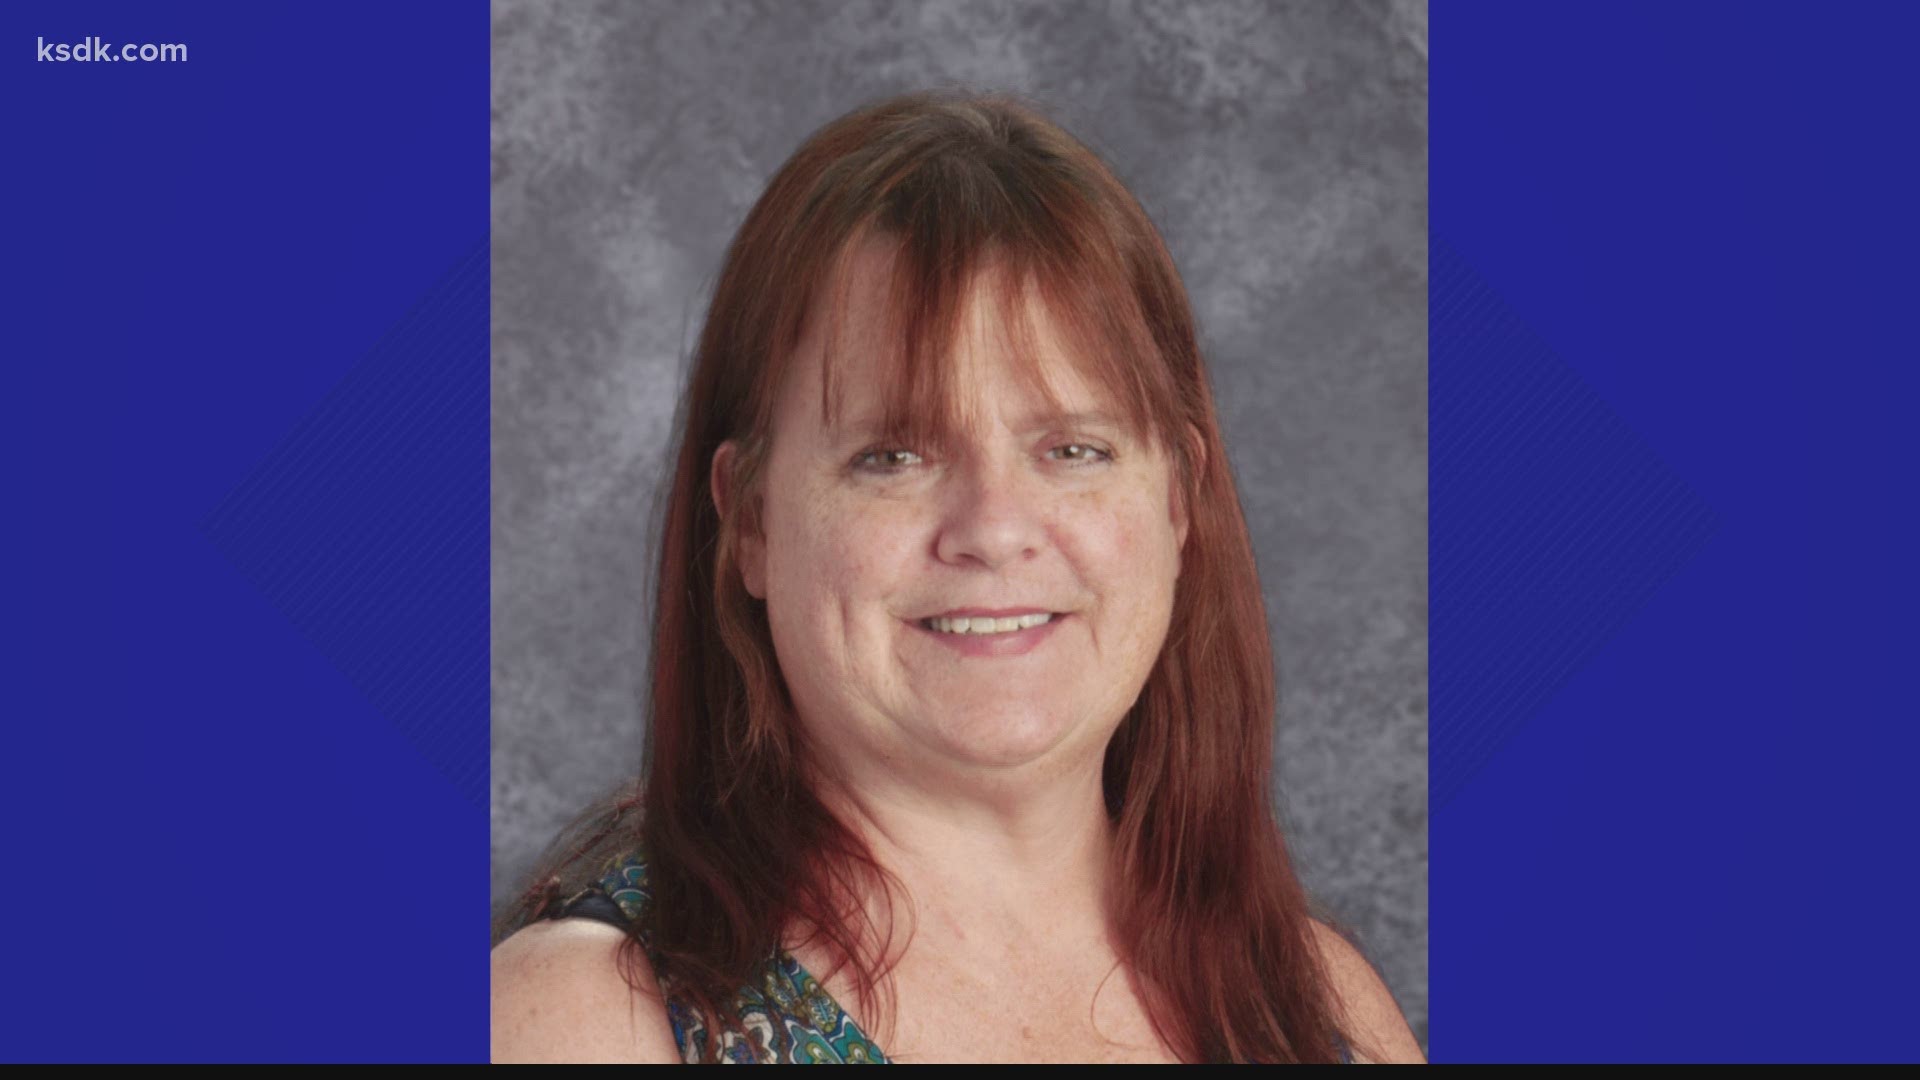 Mary Smith worked in the Special School District of St. Louis County for 21 years at Fairview Elementary, which is in the Jennings School District